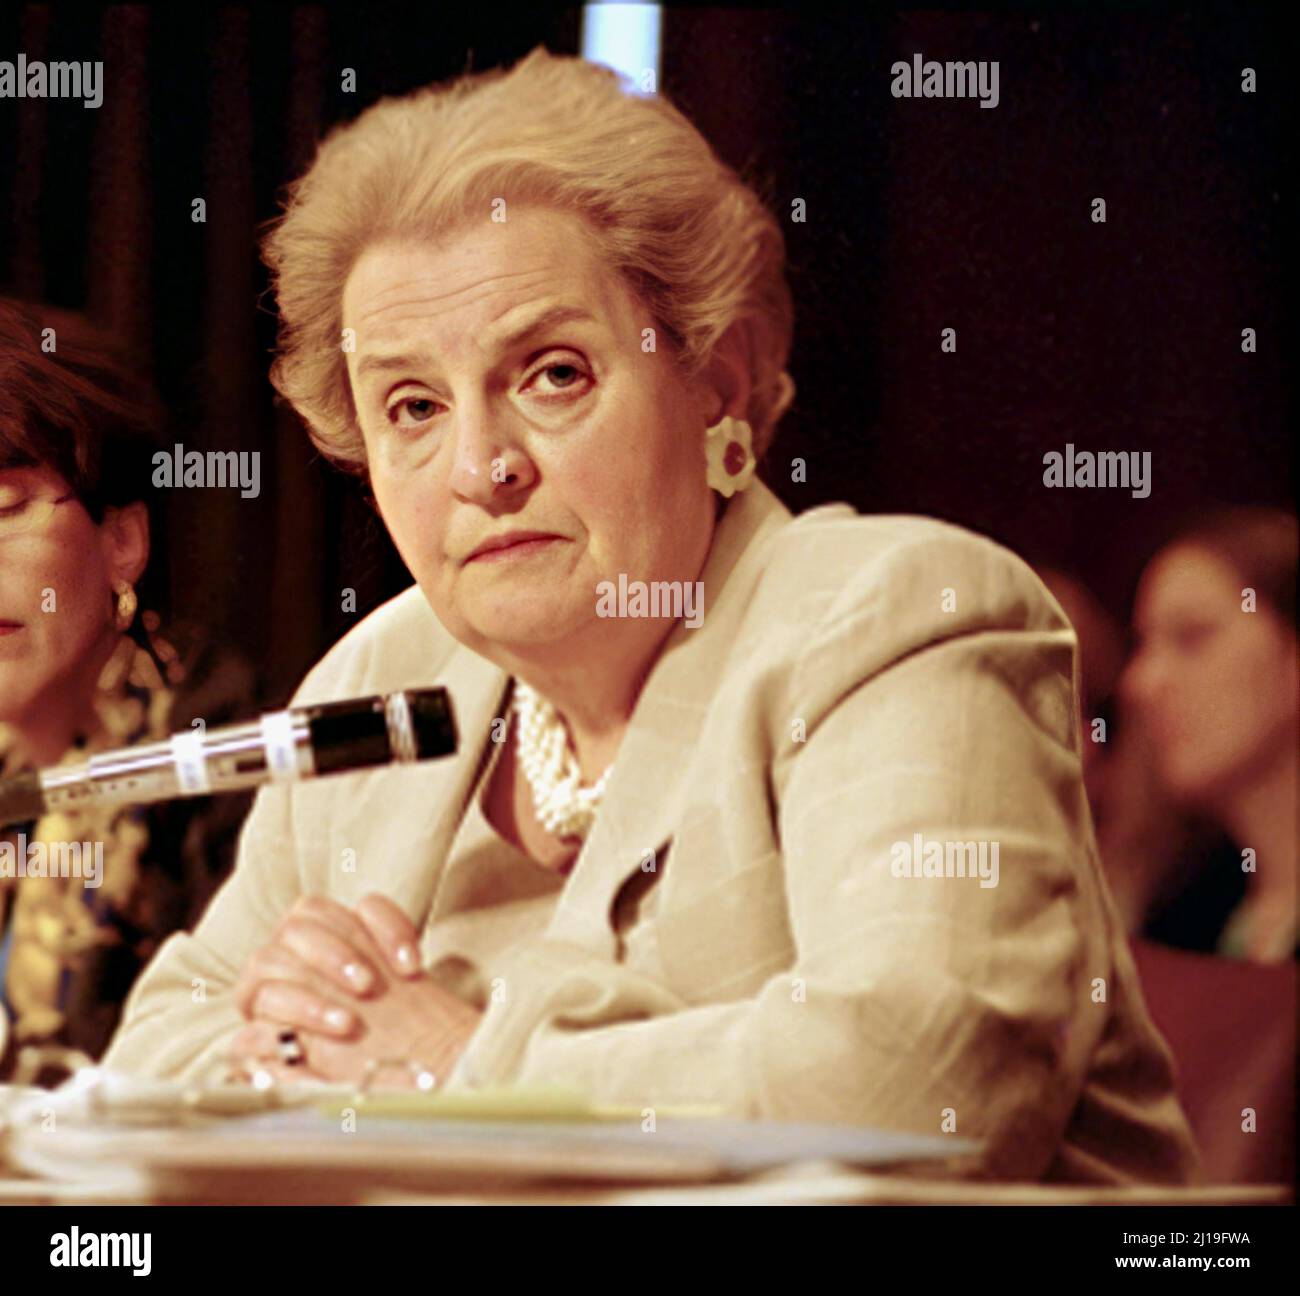 1997 , 10 june , Washington , USA : The american politician MADELEINE Korbel ALBRIGHT ( Marie Jana Korbelova , 1937 - 2022 ), was an American diplomat who served as the 64th United States Secretary of State from 1997 to 2001 under President Bill Clinton . She was the first female secretary of state in U.S. history.  In this photo Madeleine Albright testifies before the Senate Finance Committee on China's Most-Favored-Nation status .  Photo by White House Official Staff photographer Scott J. Ferrell .-  Segratario di stato donna alla Presidenza degli Stati Uniti d'America -  STATI UNITI AMERICA Stock Photo